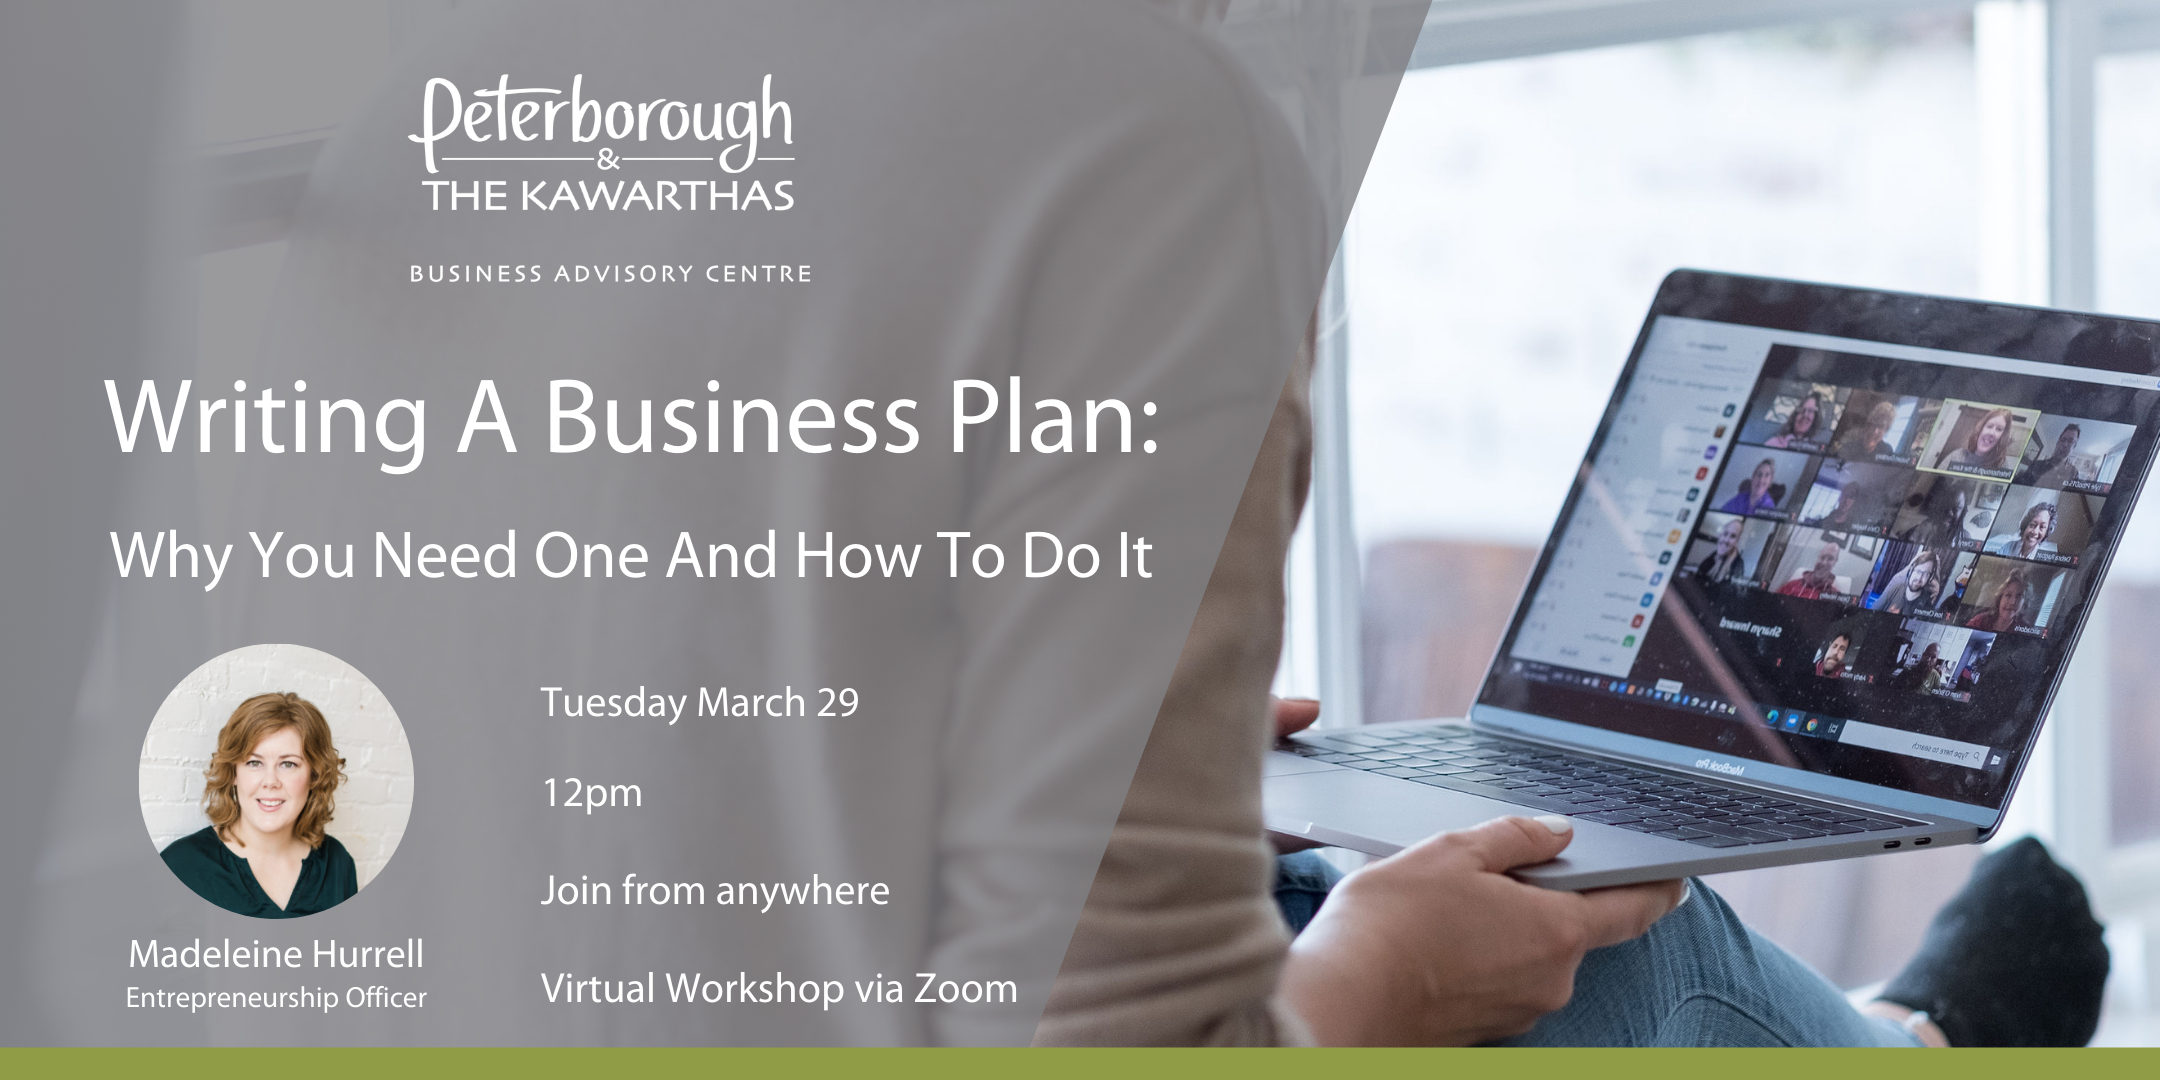 Writing a Business Plan: Why You Need One and How To Do It Tuesday March 29, 12PM, Join From Anywhere, Virtual Workshop Via Zoom Featuring Madeleine Hurrell, Entrepreneurship Officer